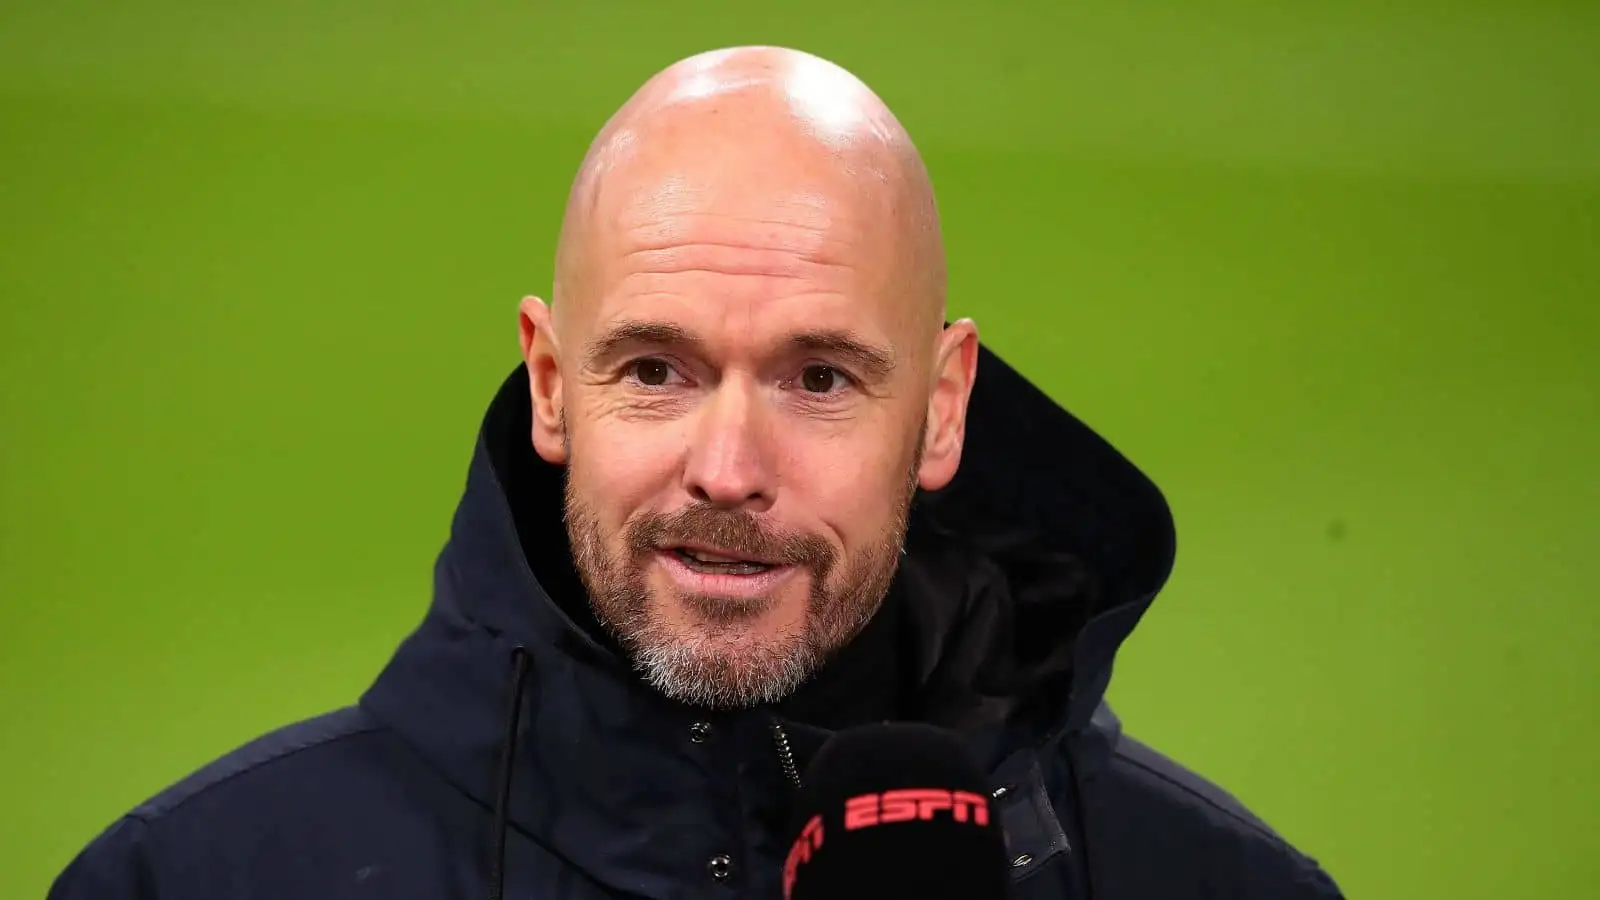 Erik ten Hag, new Man Utd manager, told to target West Ham forward. Photo shows Ten Hag speaks to the media during his spell as Ajax boss